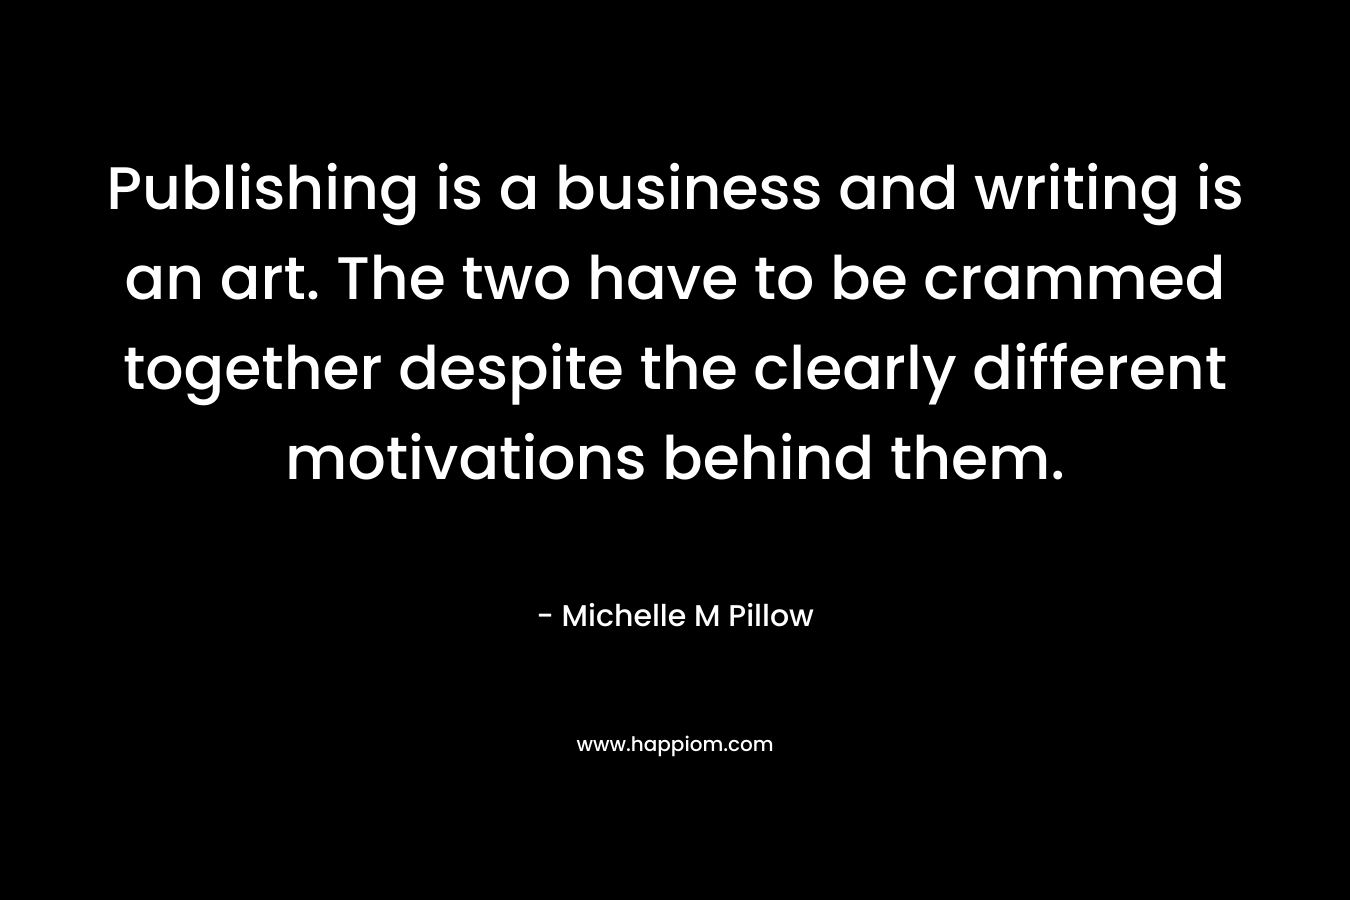 Publishing is a business and writing is an art. The two have to be crammed together despite the clearly different motivations behind them.